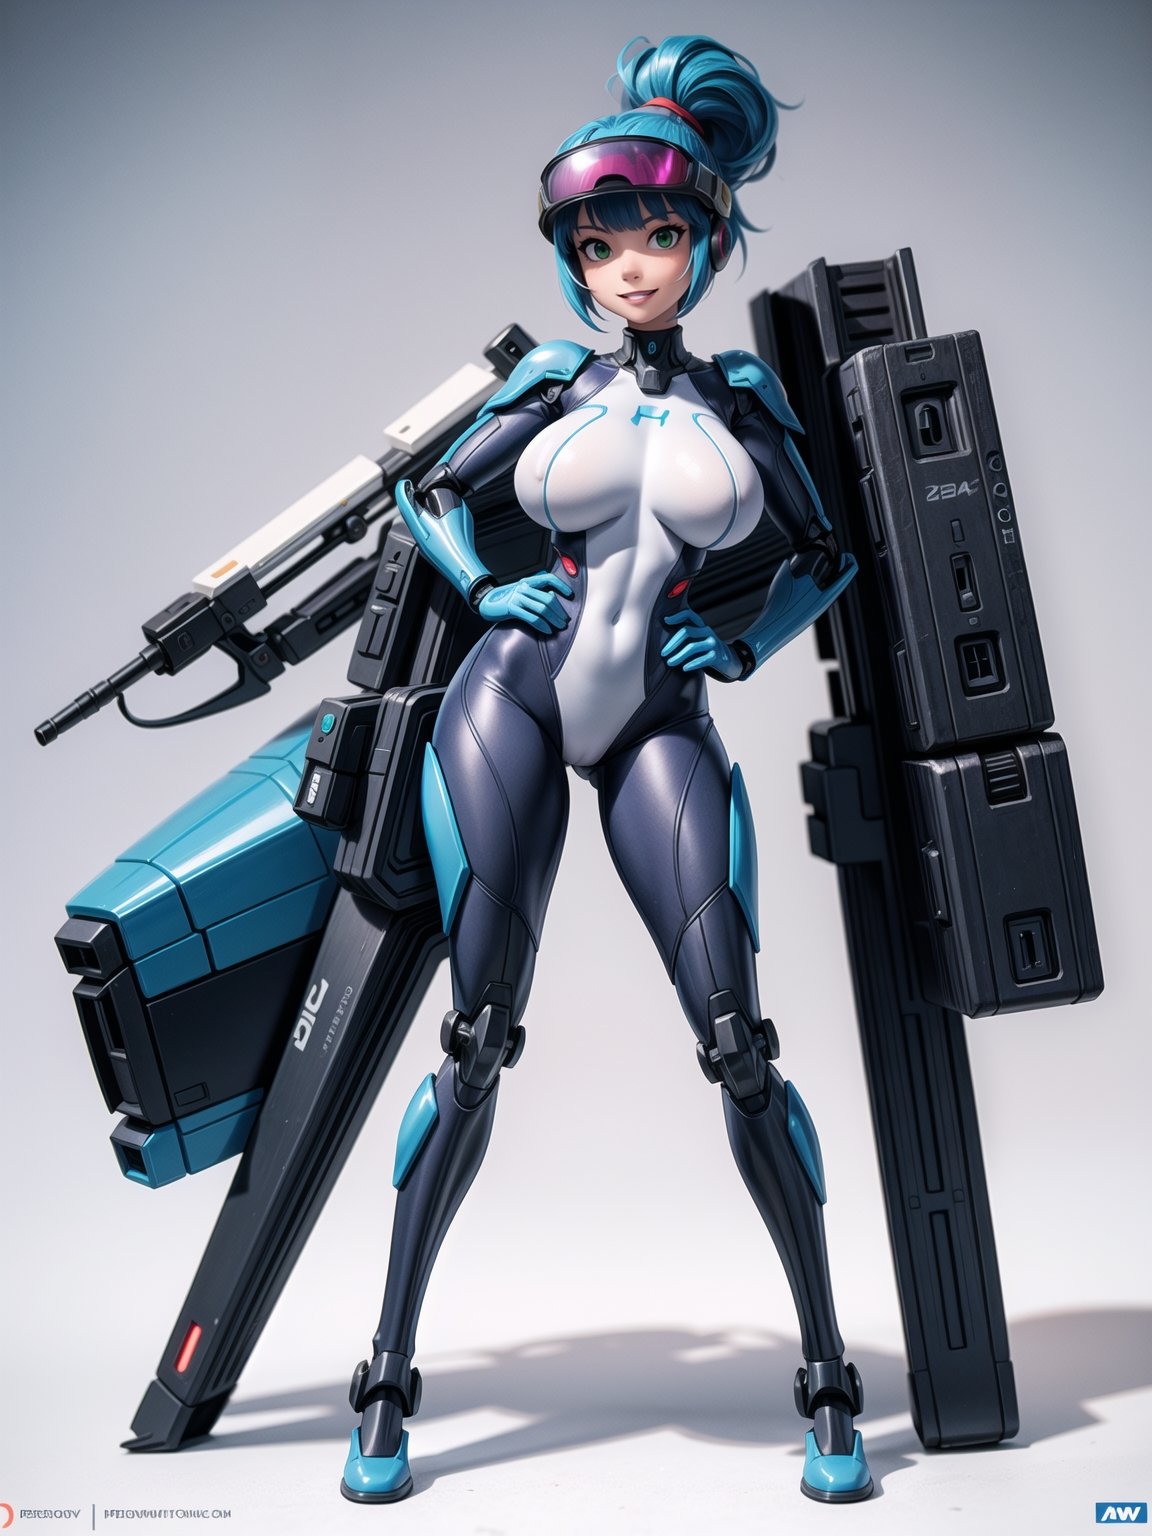 A woman, wearing mecha suit+cybernetic armor+futuristic costume, white suit with blue parts, cybernetic helmet with colored visor, gigantic breasts, bright blue hair, extremely short hair, hair with bangs in front of the eyes, hair with ponytail, looking at the viewer, sensual pose+Interacting+leaning on anything+object+leaning against on a ship with many machines, robots, structures, ((full body):1.5), 16K, UHD, unreal engine 5, quality max, max resolution, ultra-realistic, ultra-detailed, maximum sharpness, ((perfect_hands):1), Goodhands-beta2, ((mecha suit+cybernetic armor+futuristic costume, white suit with blue parts, cybernetic helmet with colored visor, gigantic breasts, super metroid, mecha, final fantasy)), ((looking at the viewer, sensual pose+Interacting+leaning on anything+object+leaning against)), 